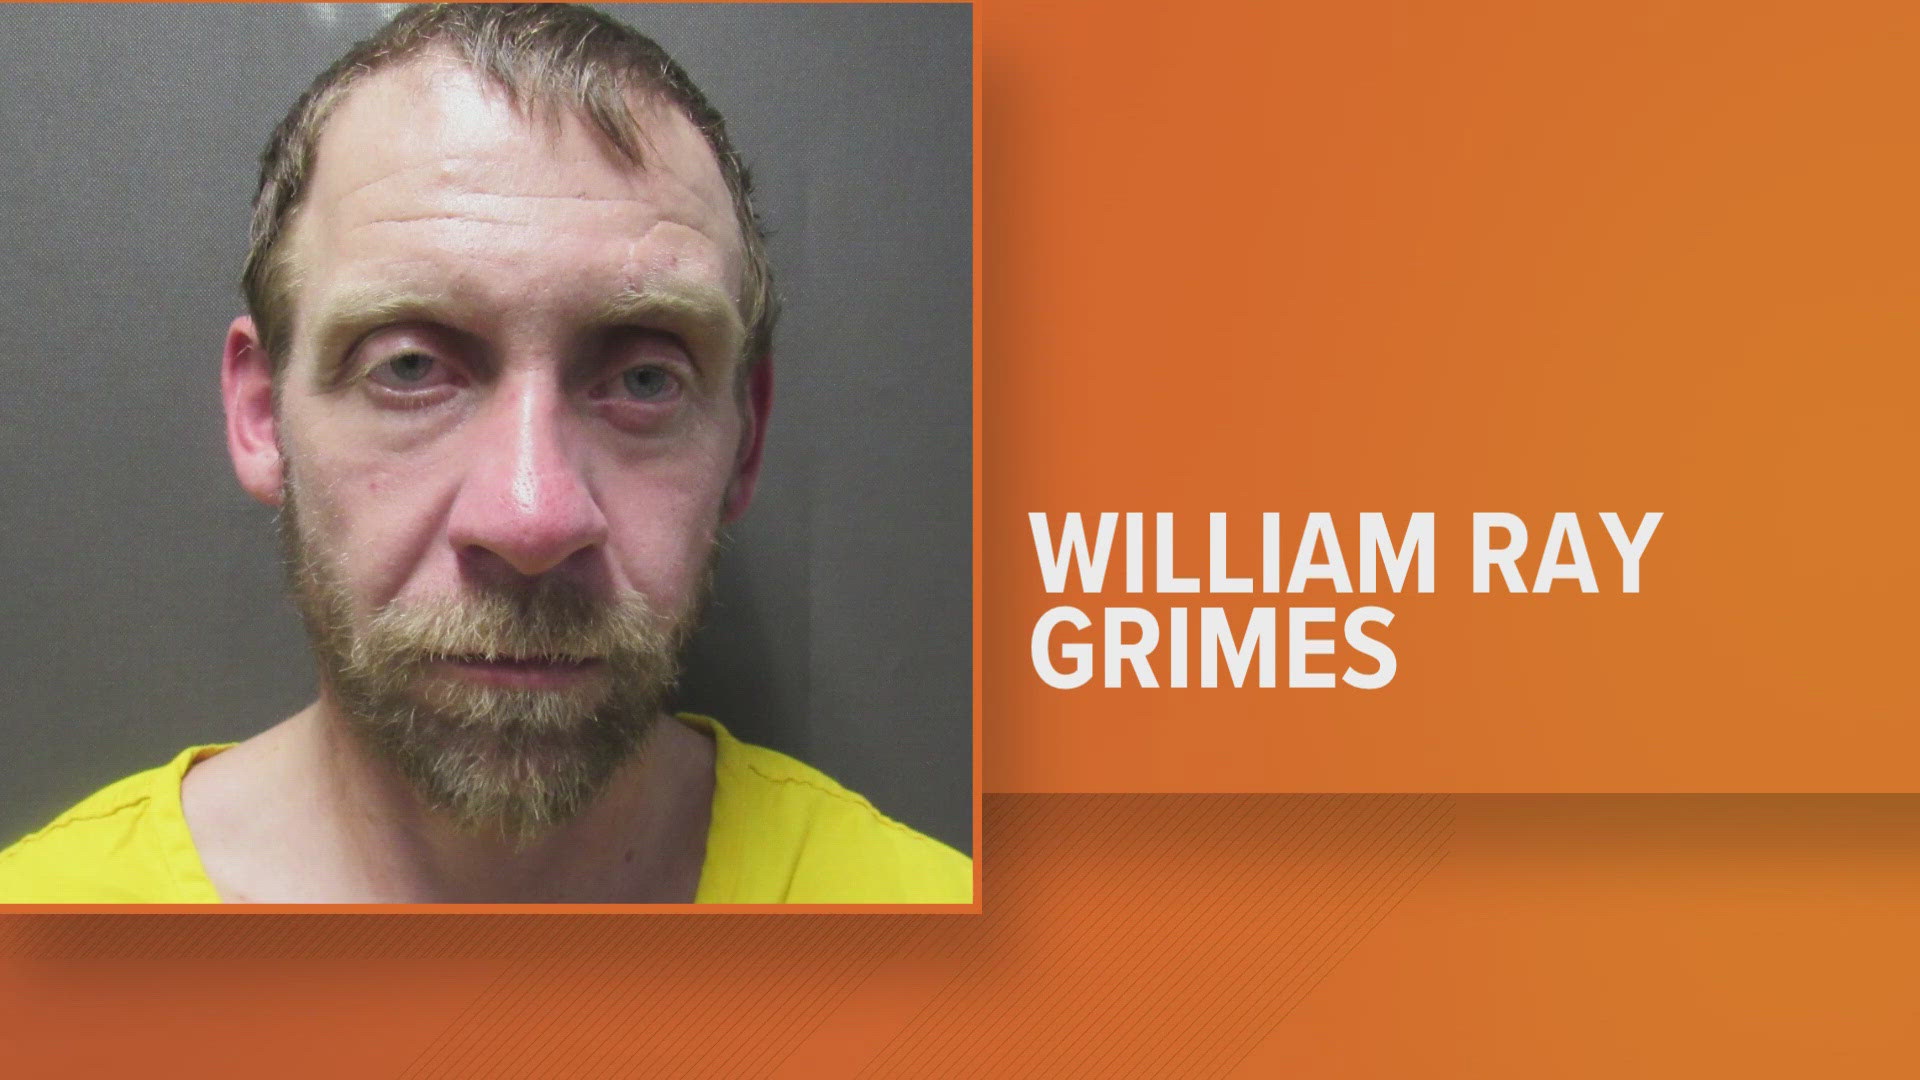 The jury indicted William Ray Grimes Wednesday on felony charges of murder, burglary and conspiracy to commit burglary in the death of retired farmer Lowell Badger.